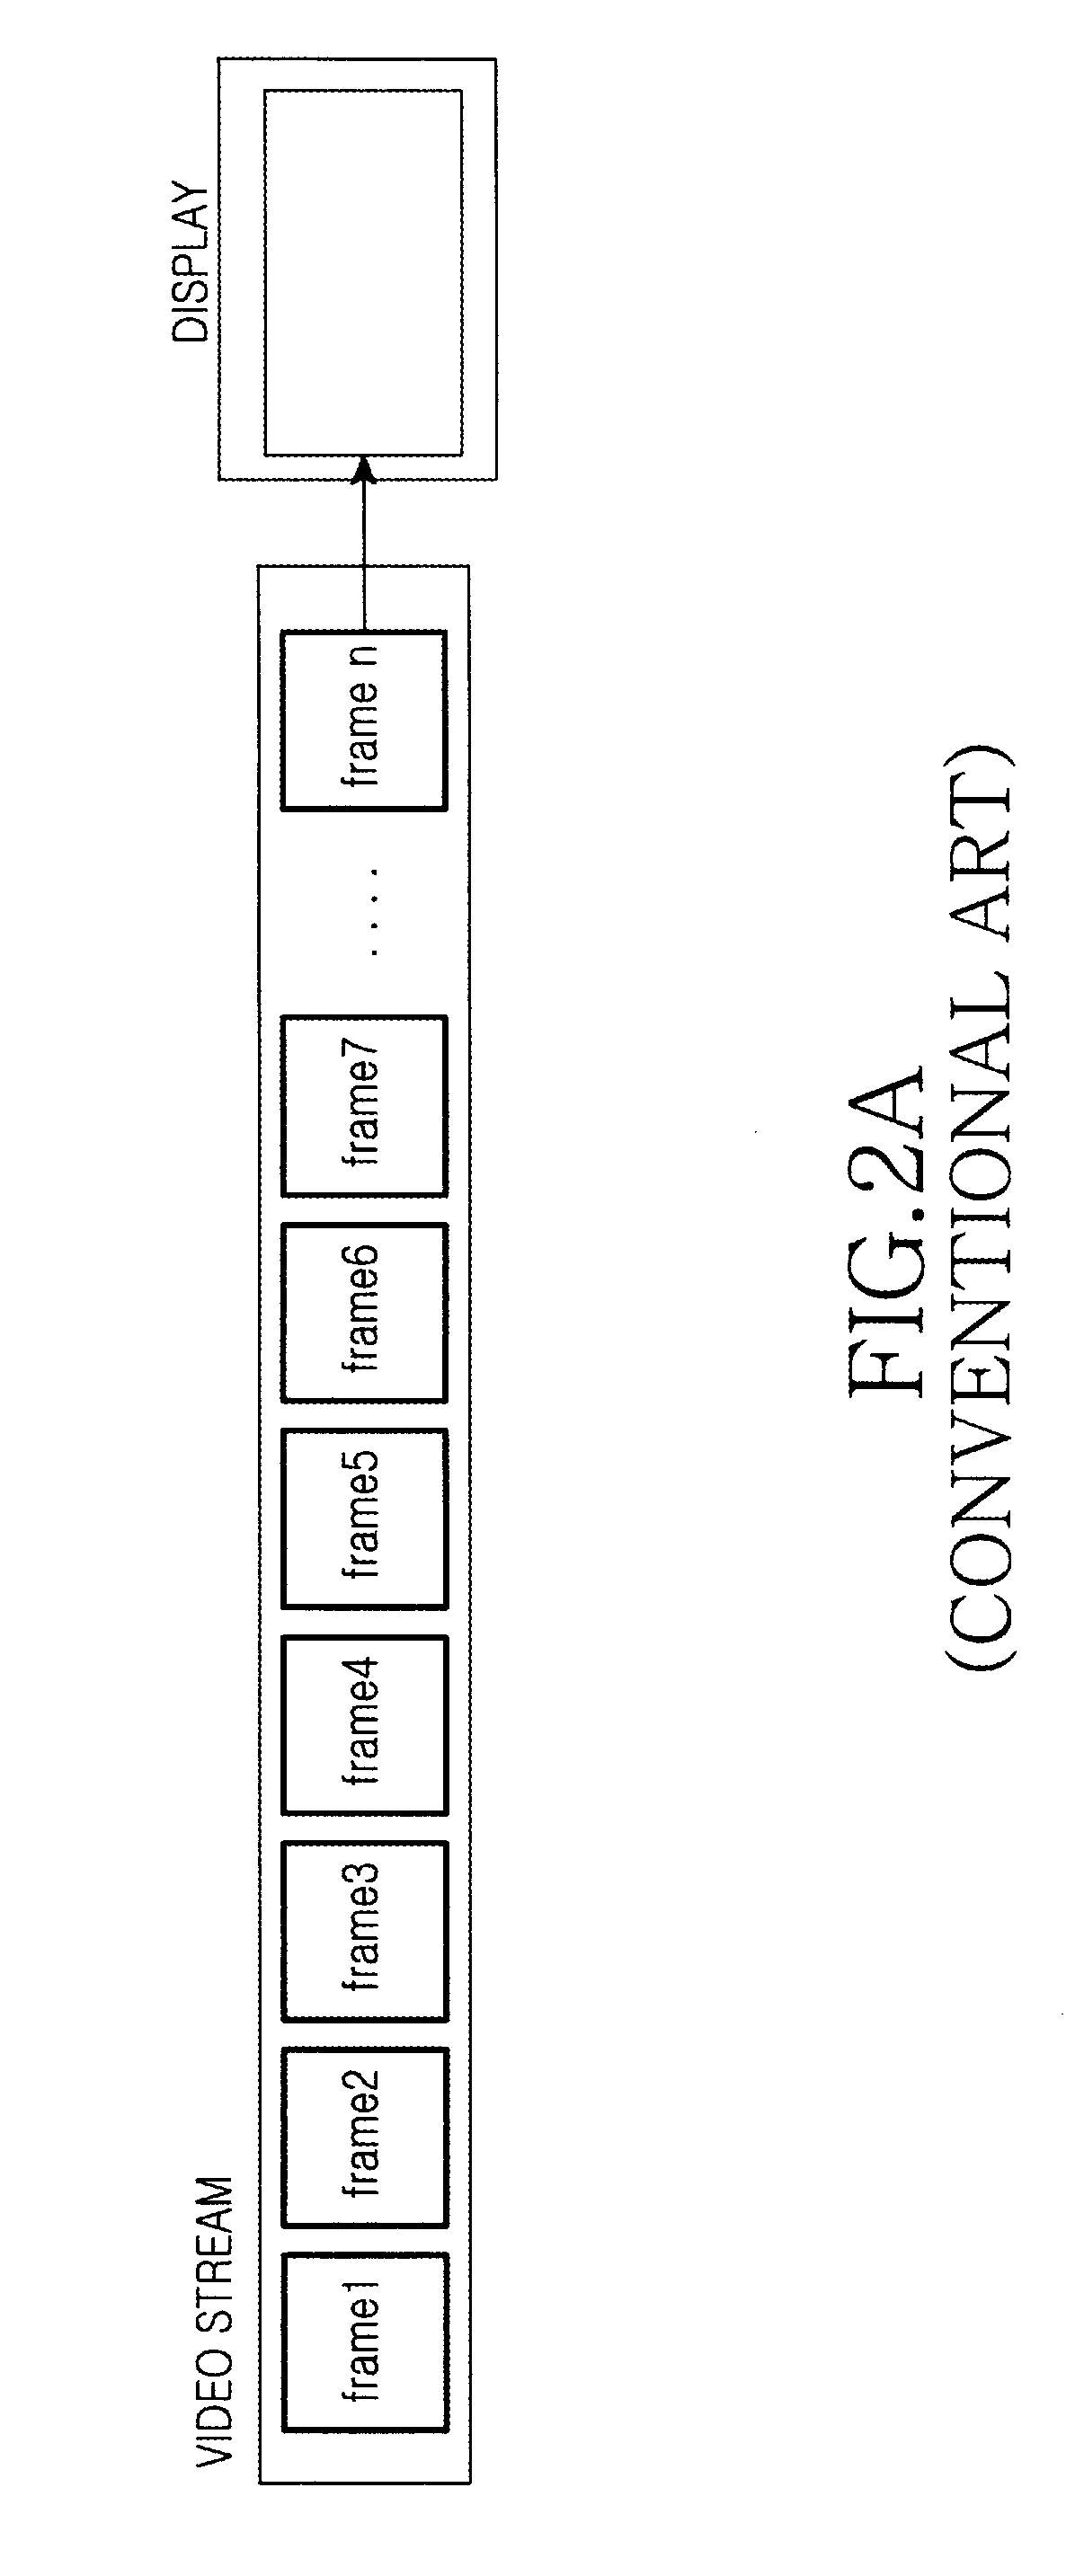 Apparatus and method for providing stereoscopic three-dimensional image/video contents on terminal based on lightweight application scene representation